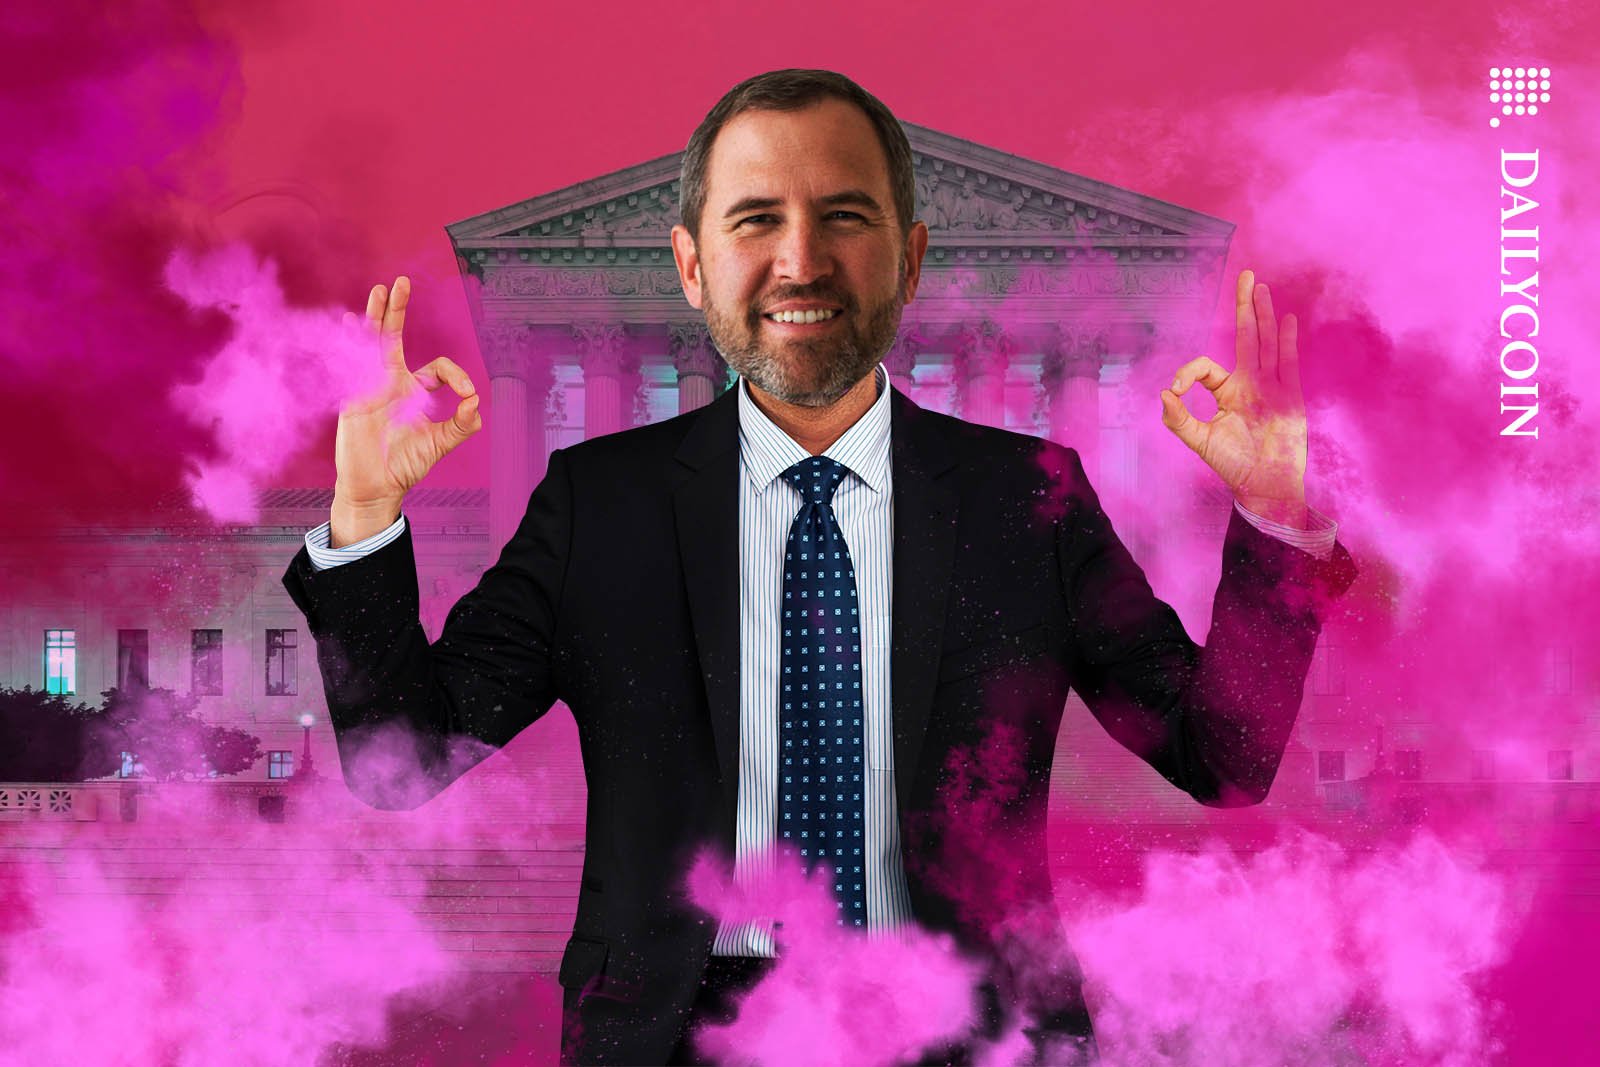 Brad Garlinghouse looking very happy with a courthouse in the background and pink clouds.